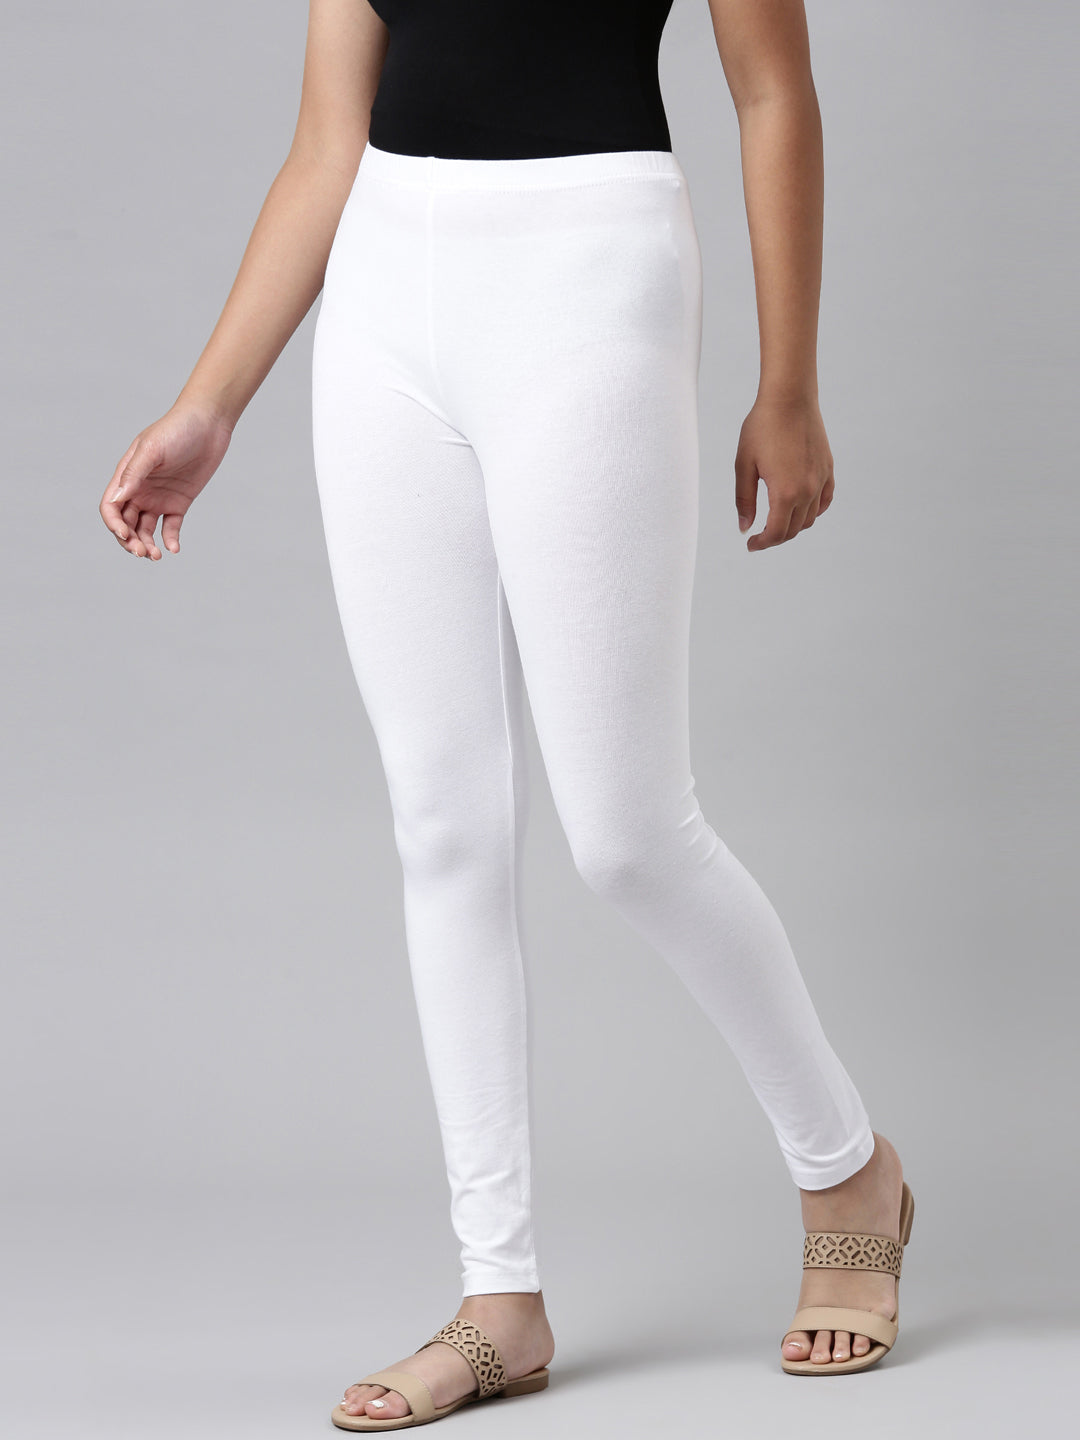 Nike Go Women's Firm-Support High-Waisted 7/8 Leggings with Pockets.  Nike.com